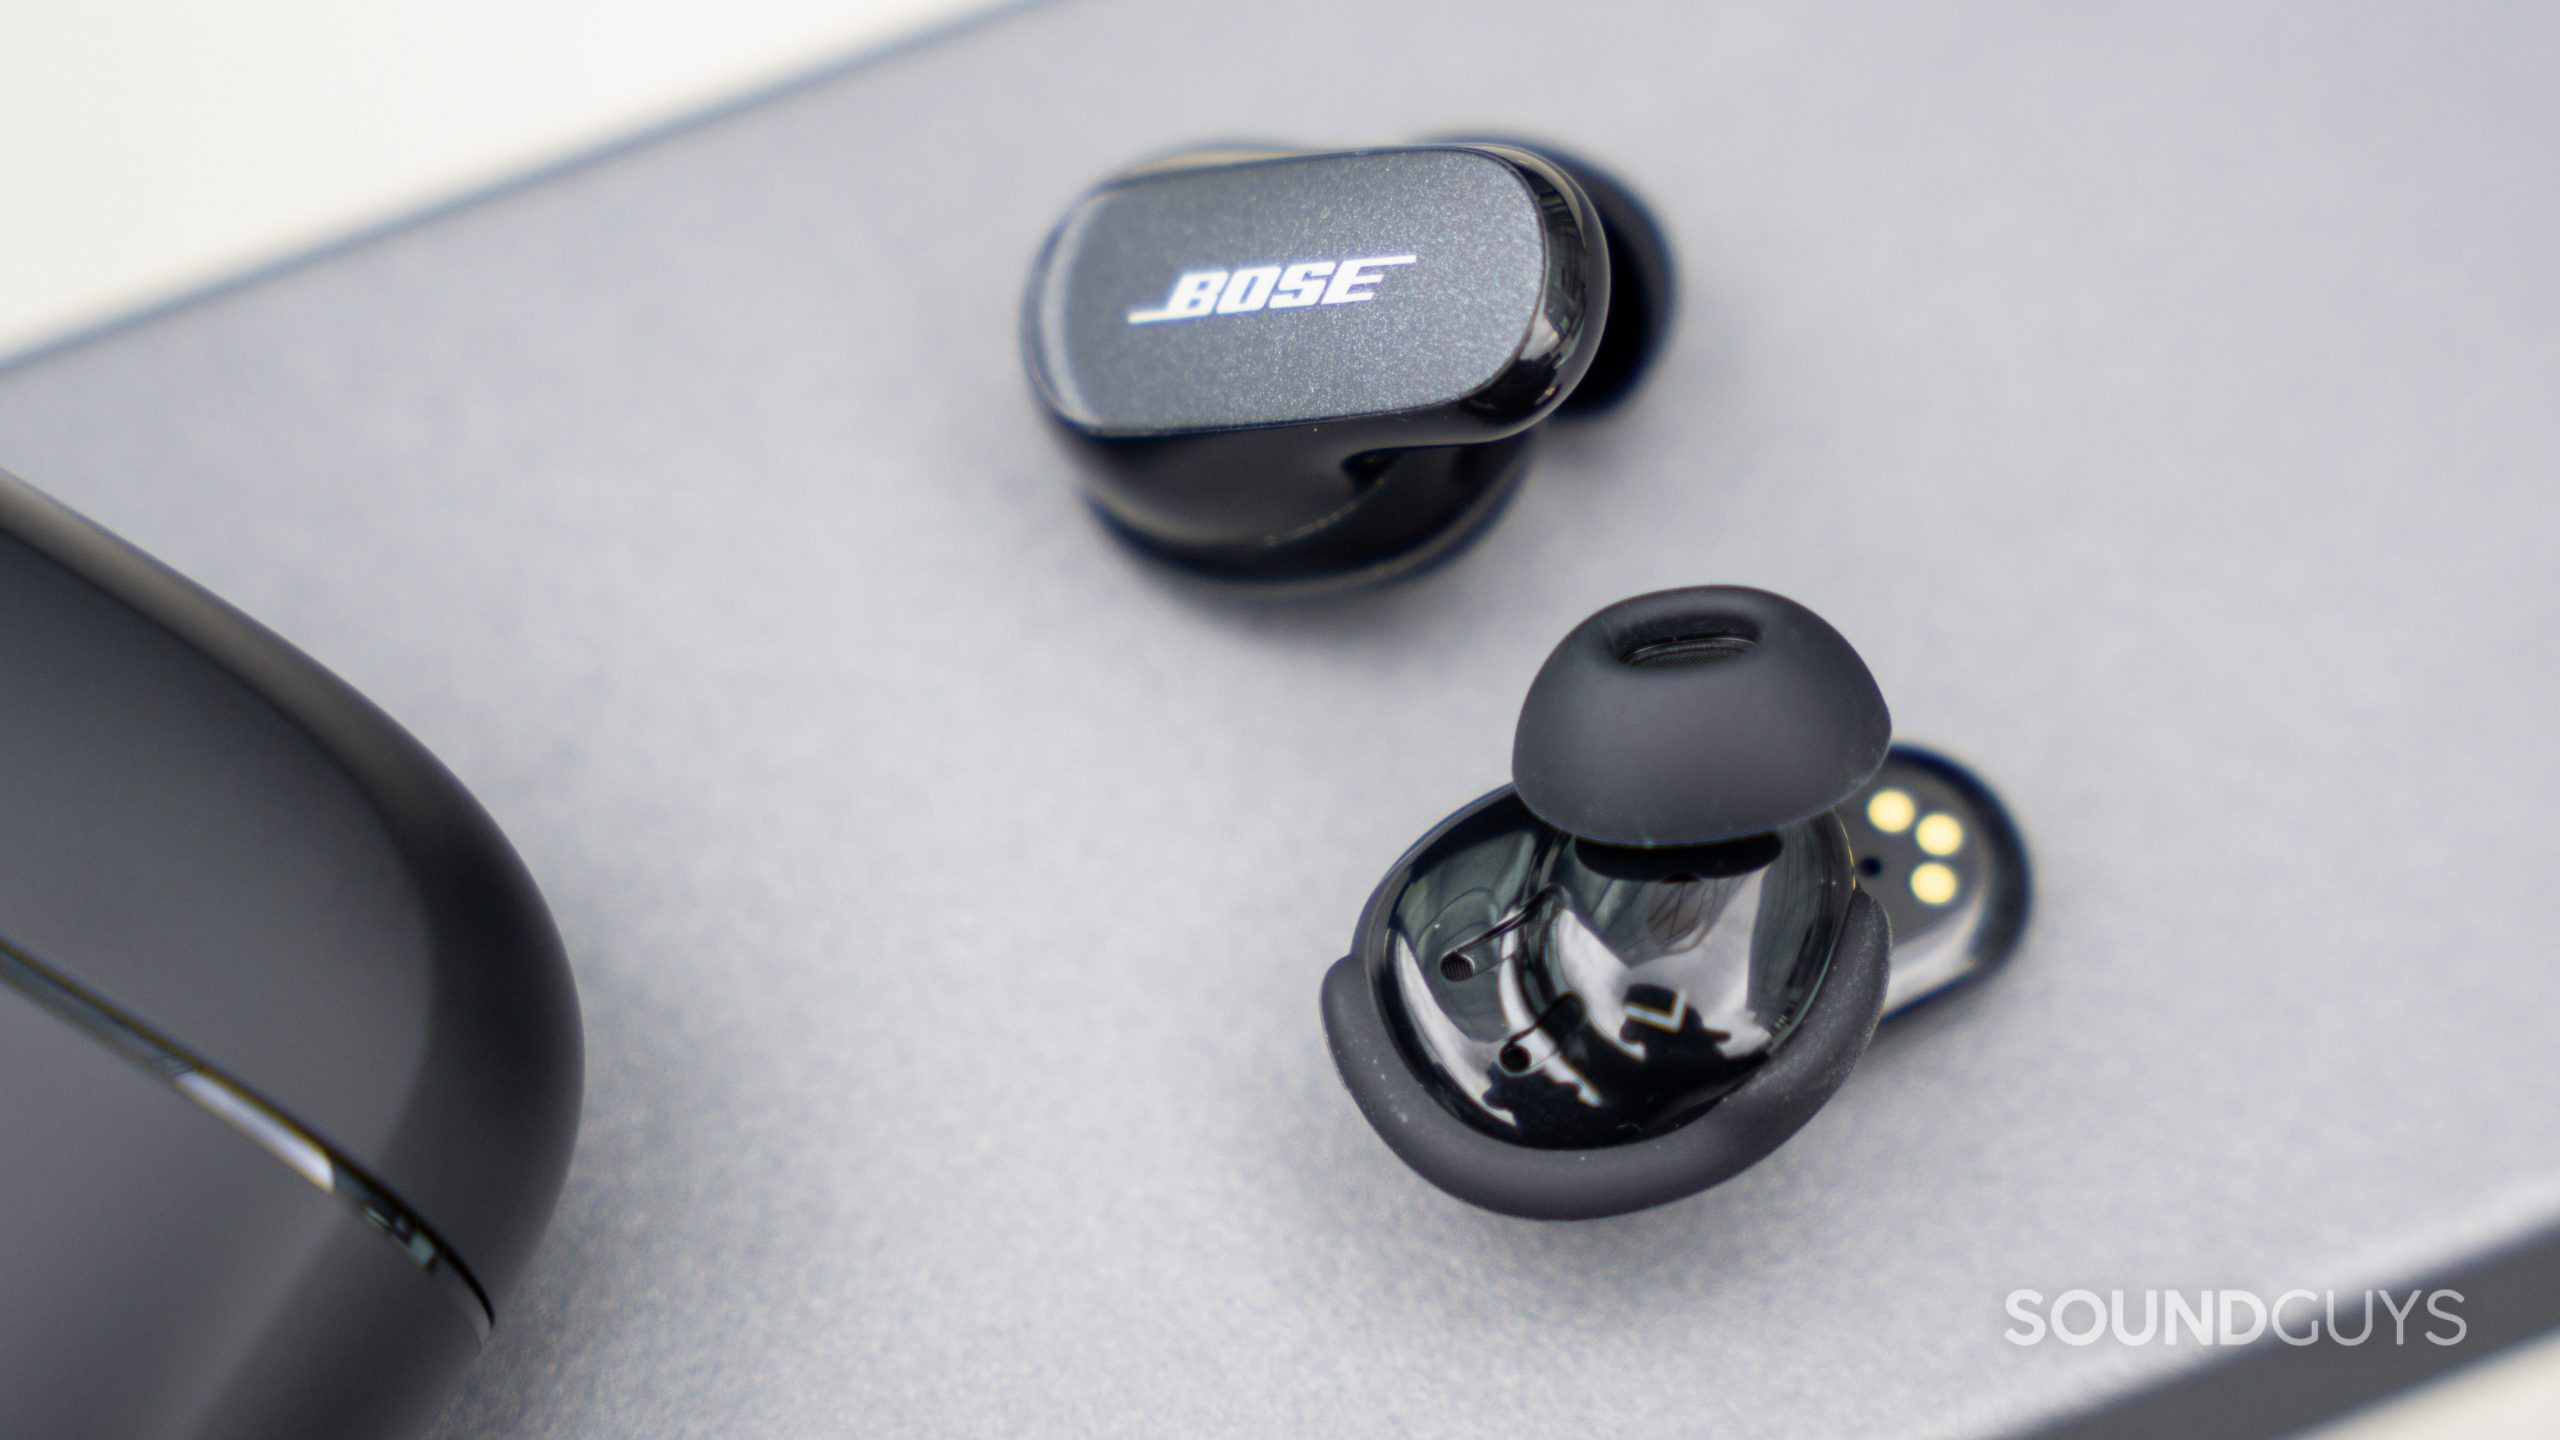 AKG Samsung Galaxy S10 Earbuds review - SoundGuys